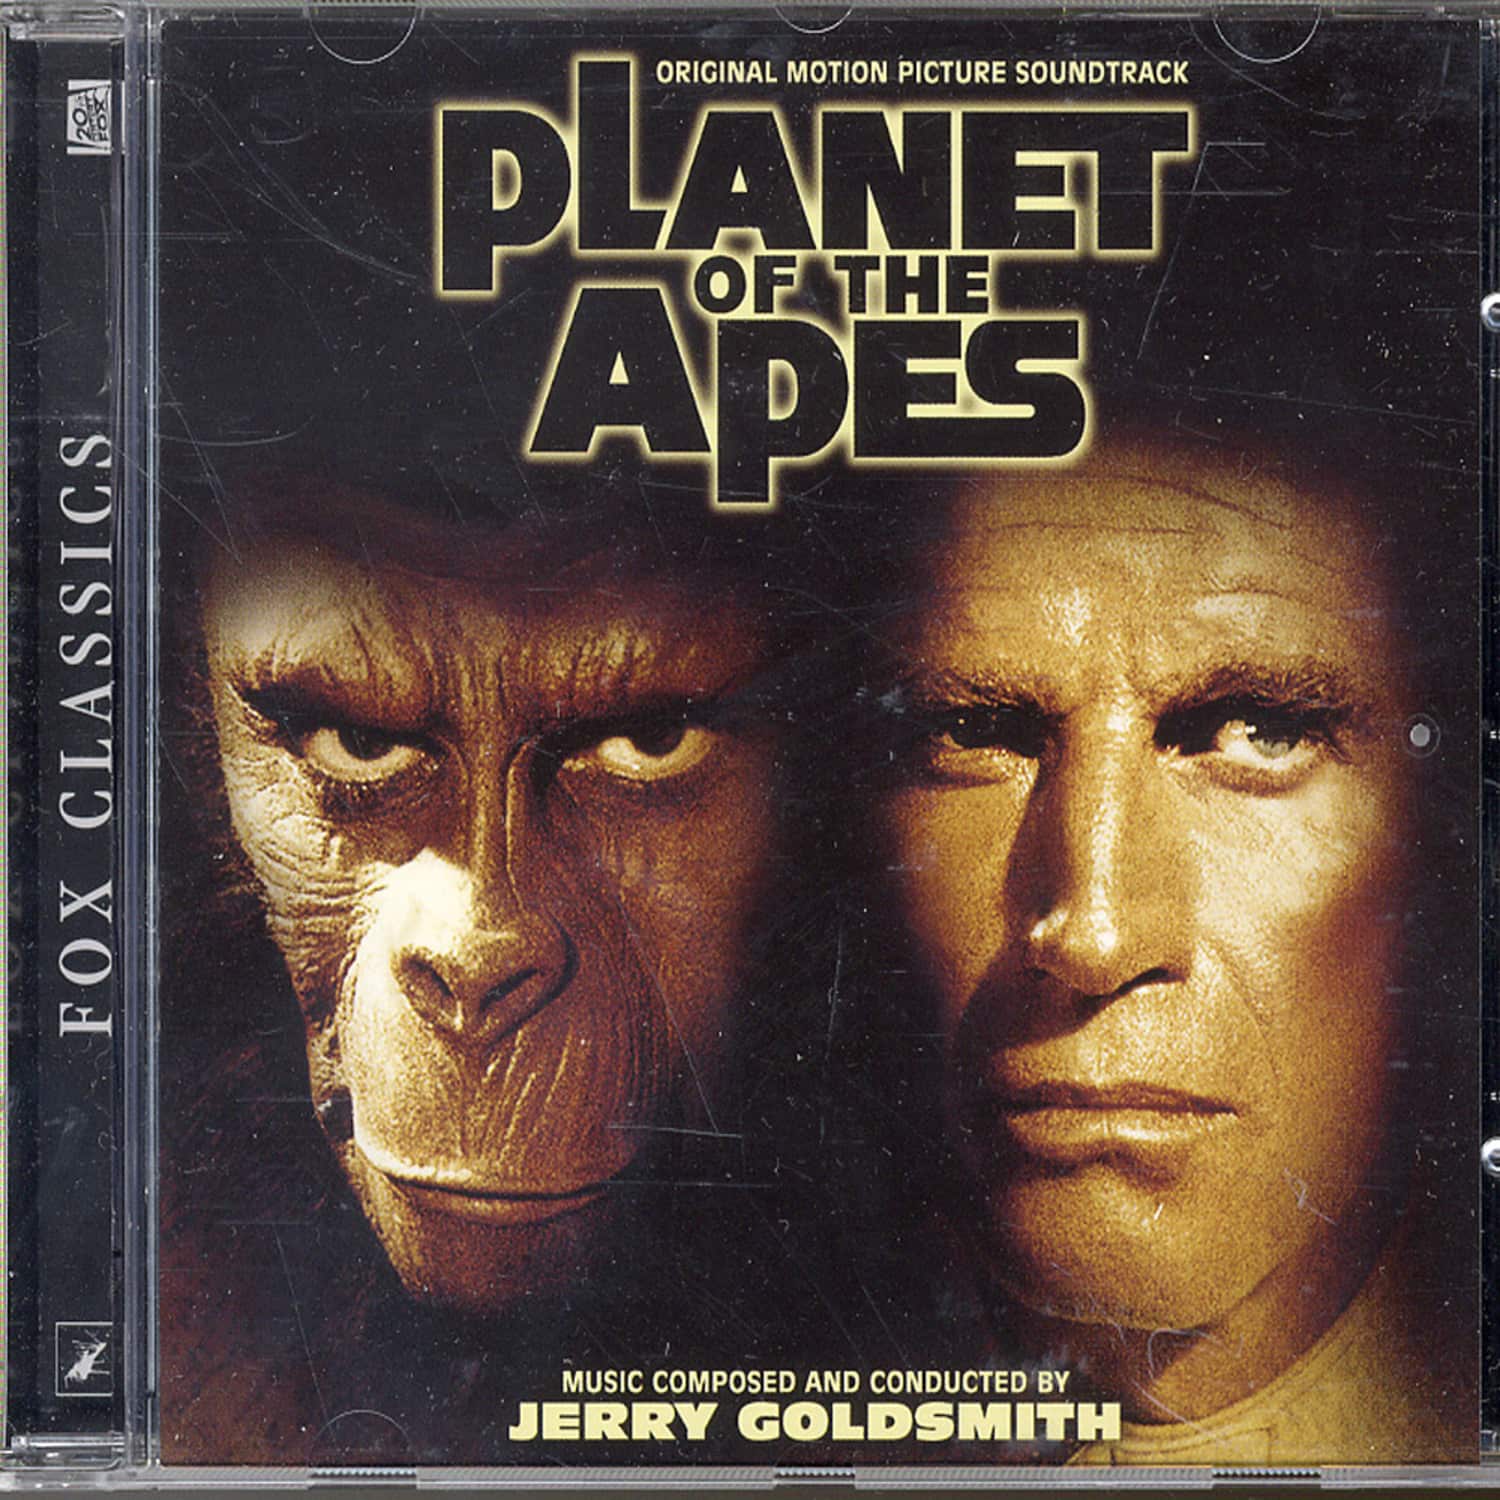 Jerry Goldsmith - PLANET OF THE APES / ORIGINAL MOTION PICTURE SOUNDTRACK 